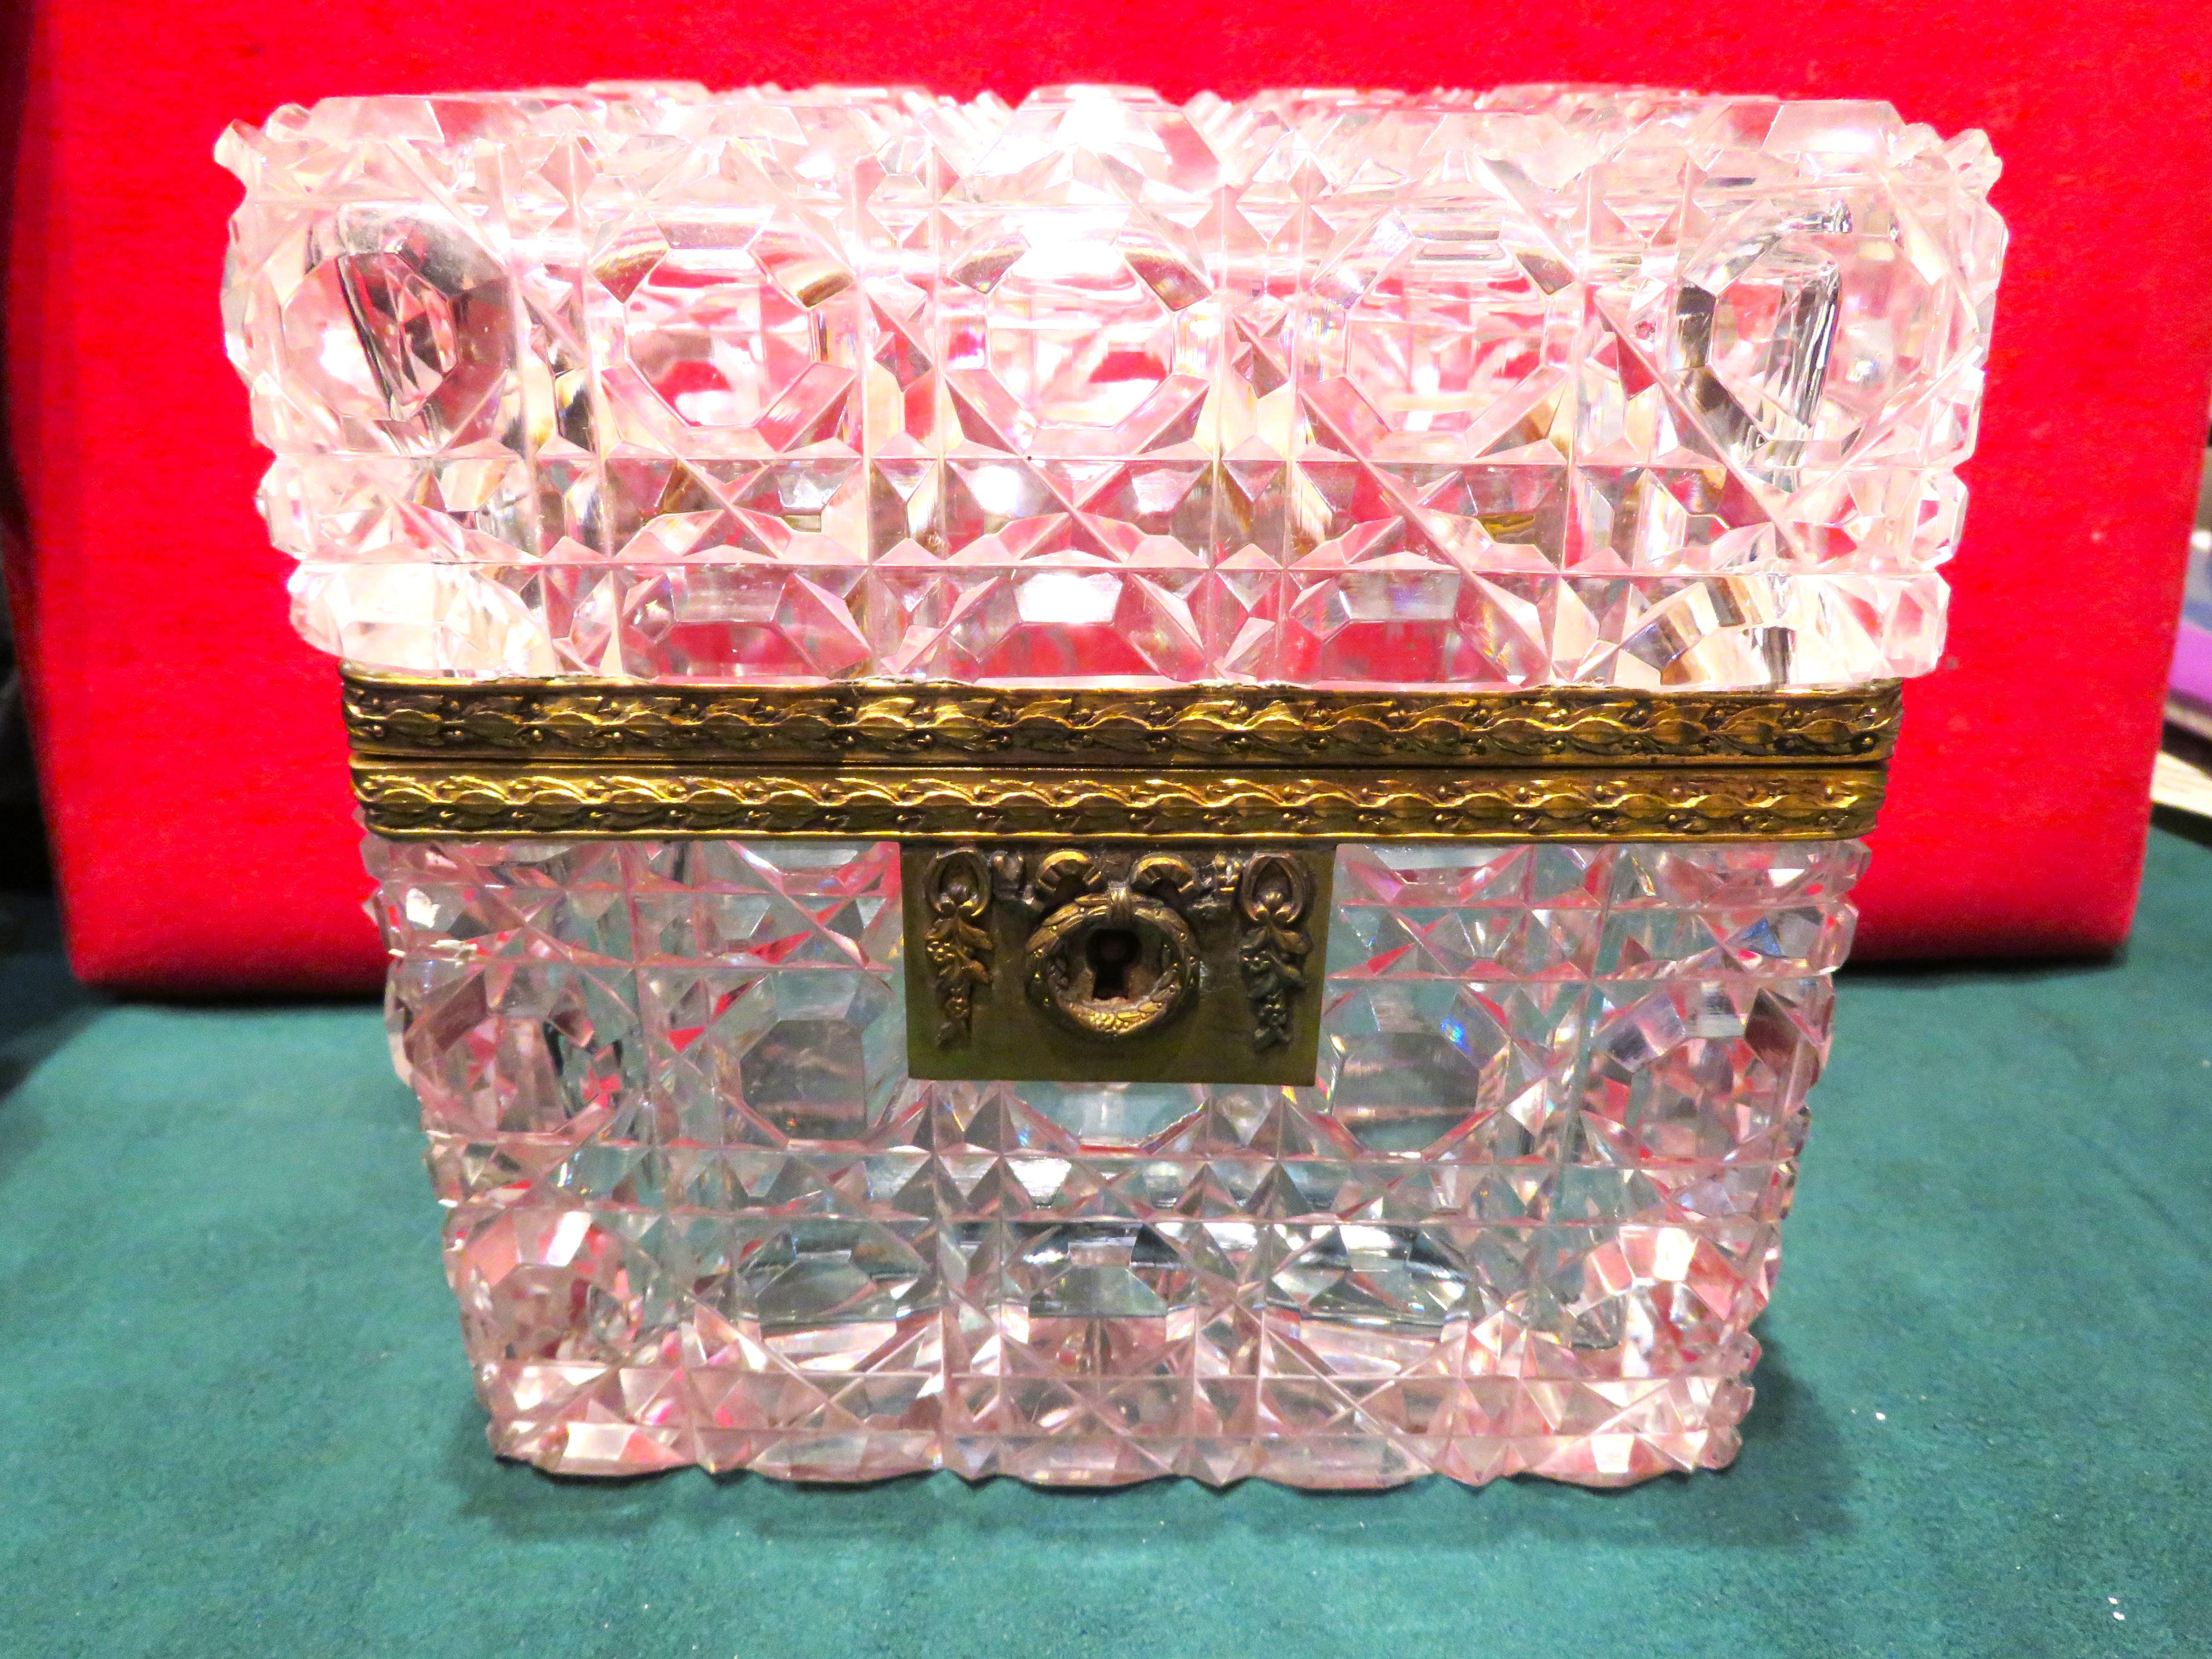 A Rare Beautiful 19th Century Bacarrat Style Antique Hand Cut Hinged Lidded French Crystal Box Gilt Bronze Mounted Cut Crystal Box. The rectangular hinged lid and sides centering deeply cut bands of flat topped rectangular details within diamond